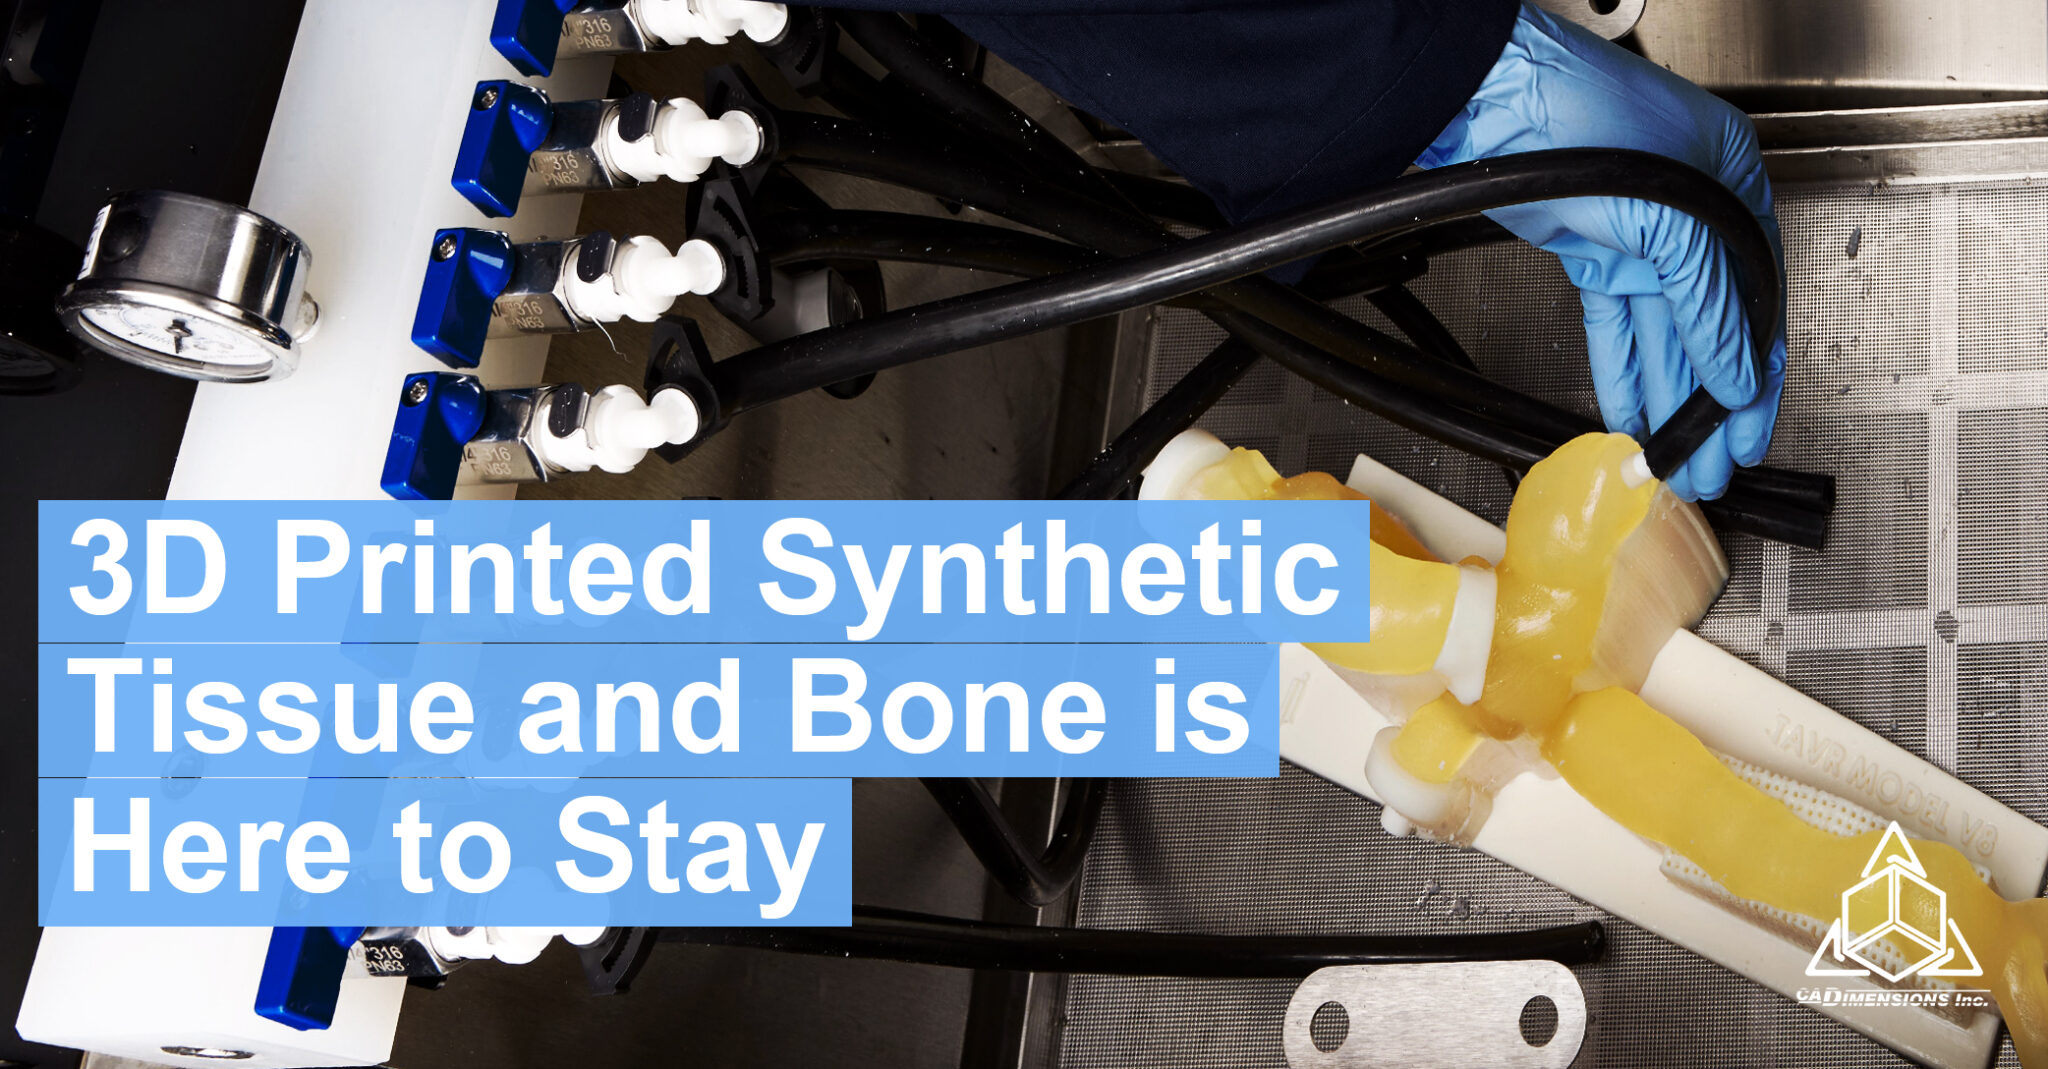 3d printed synthetic bone and tissue is here to stay